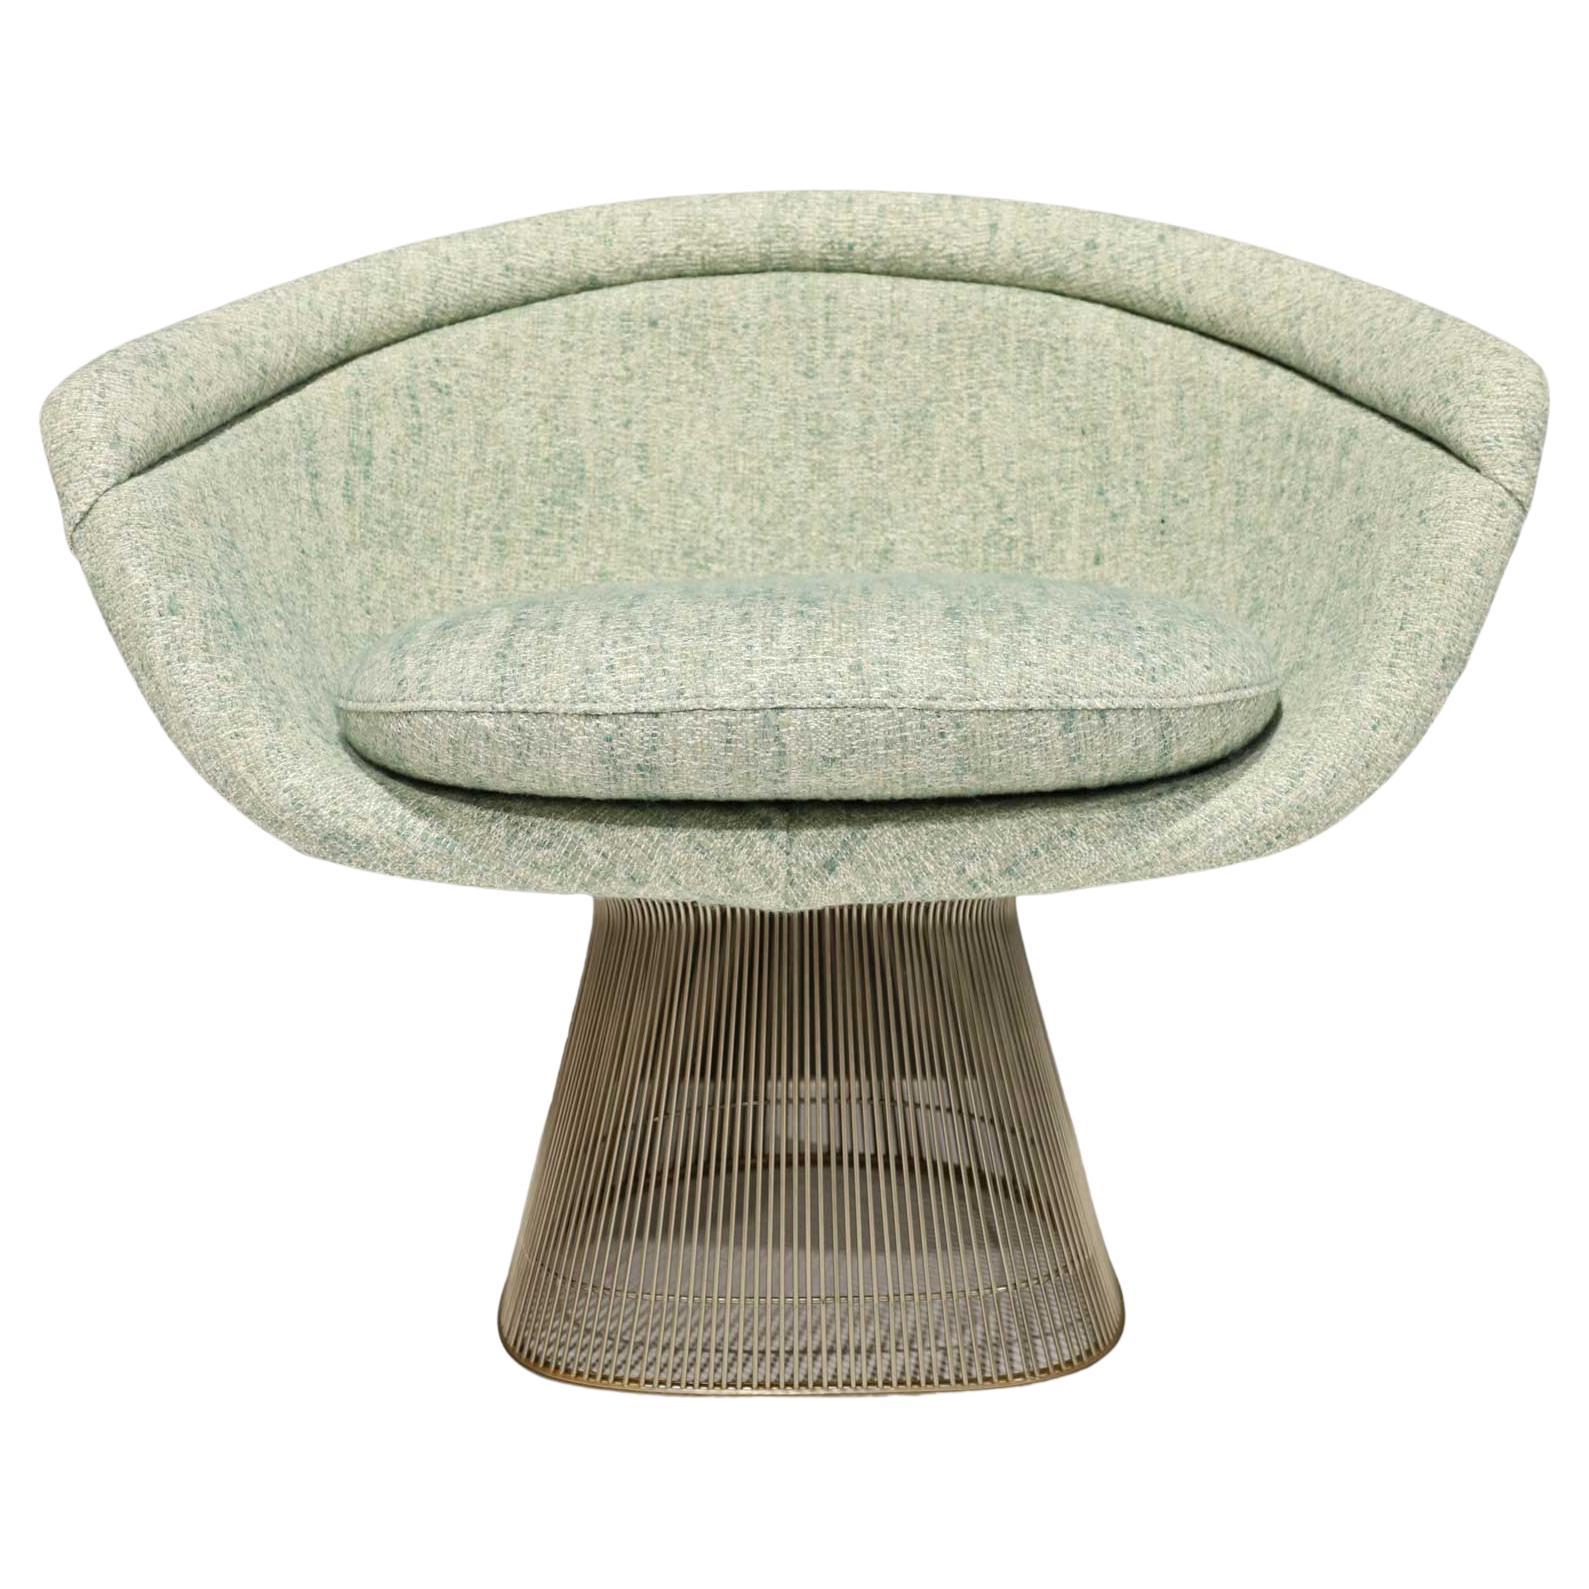 Warren Platner for Knoll Lounge Chair in Green Woven Fabric